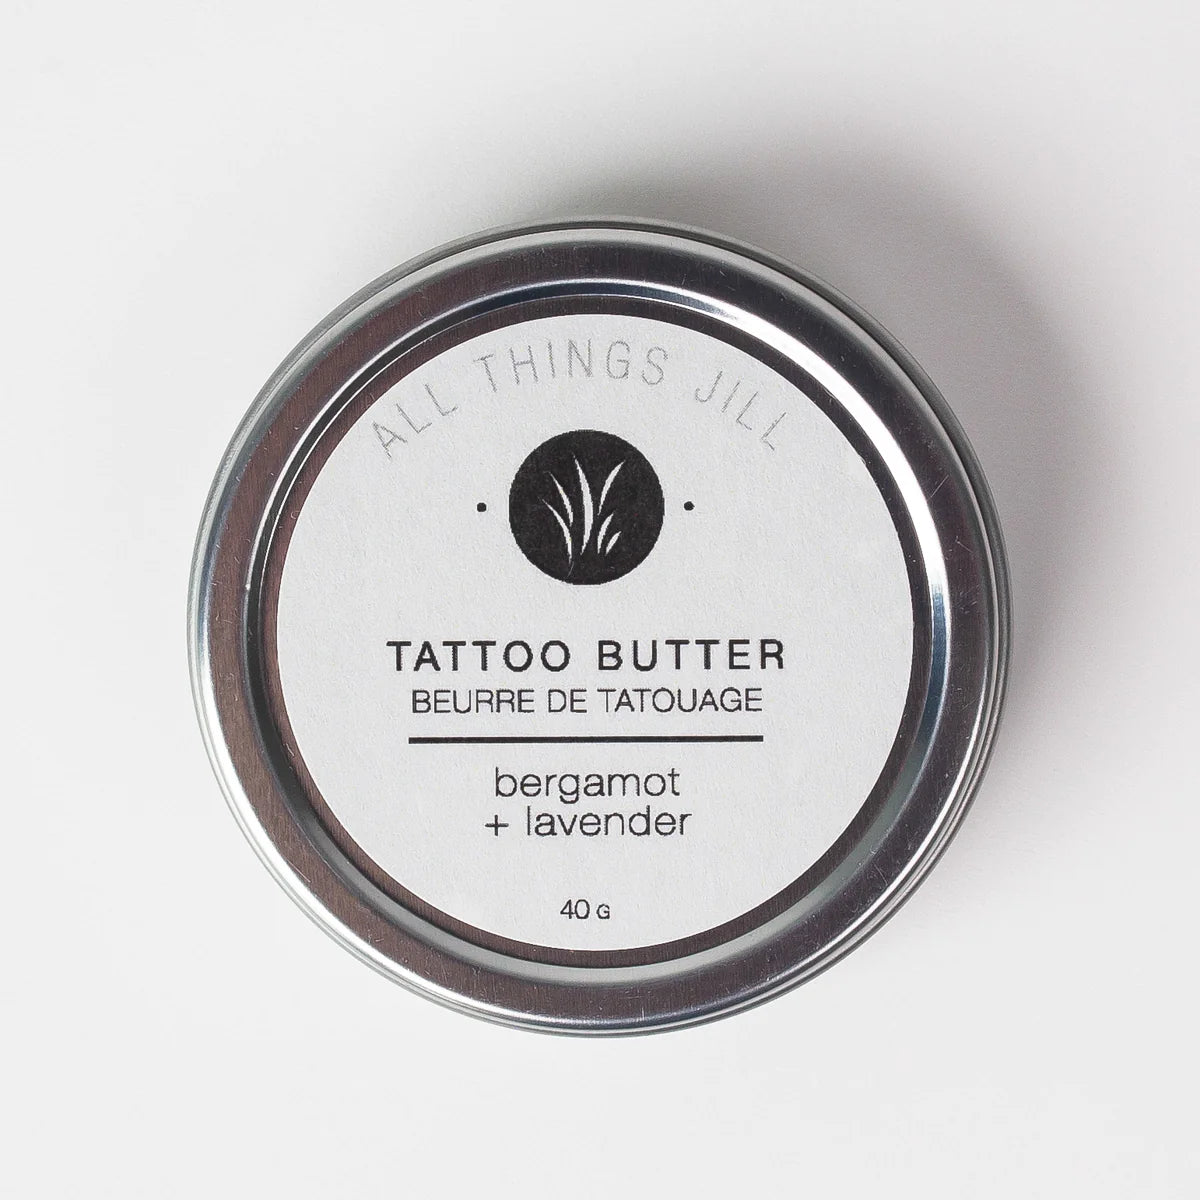 Bergamot and Lavender Tatoo Butter by All Things Jill, 40 g